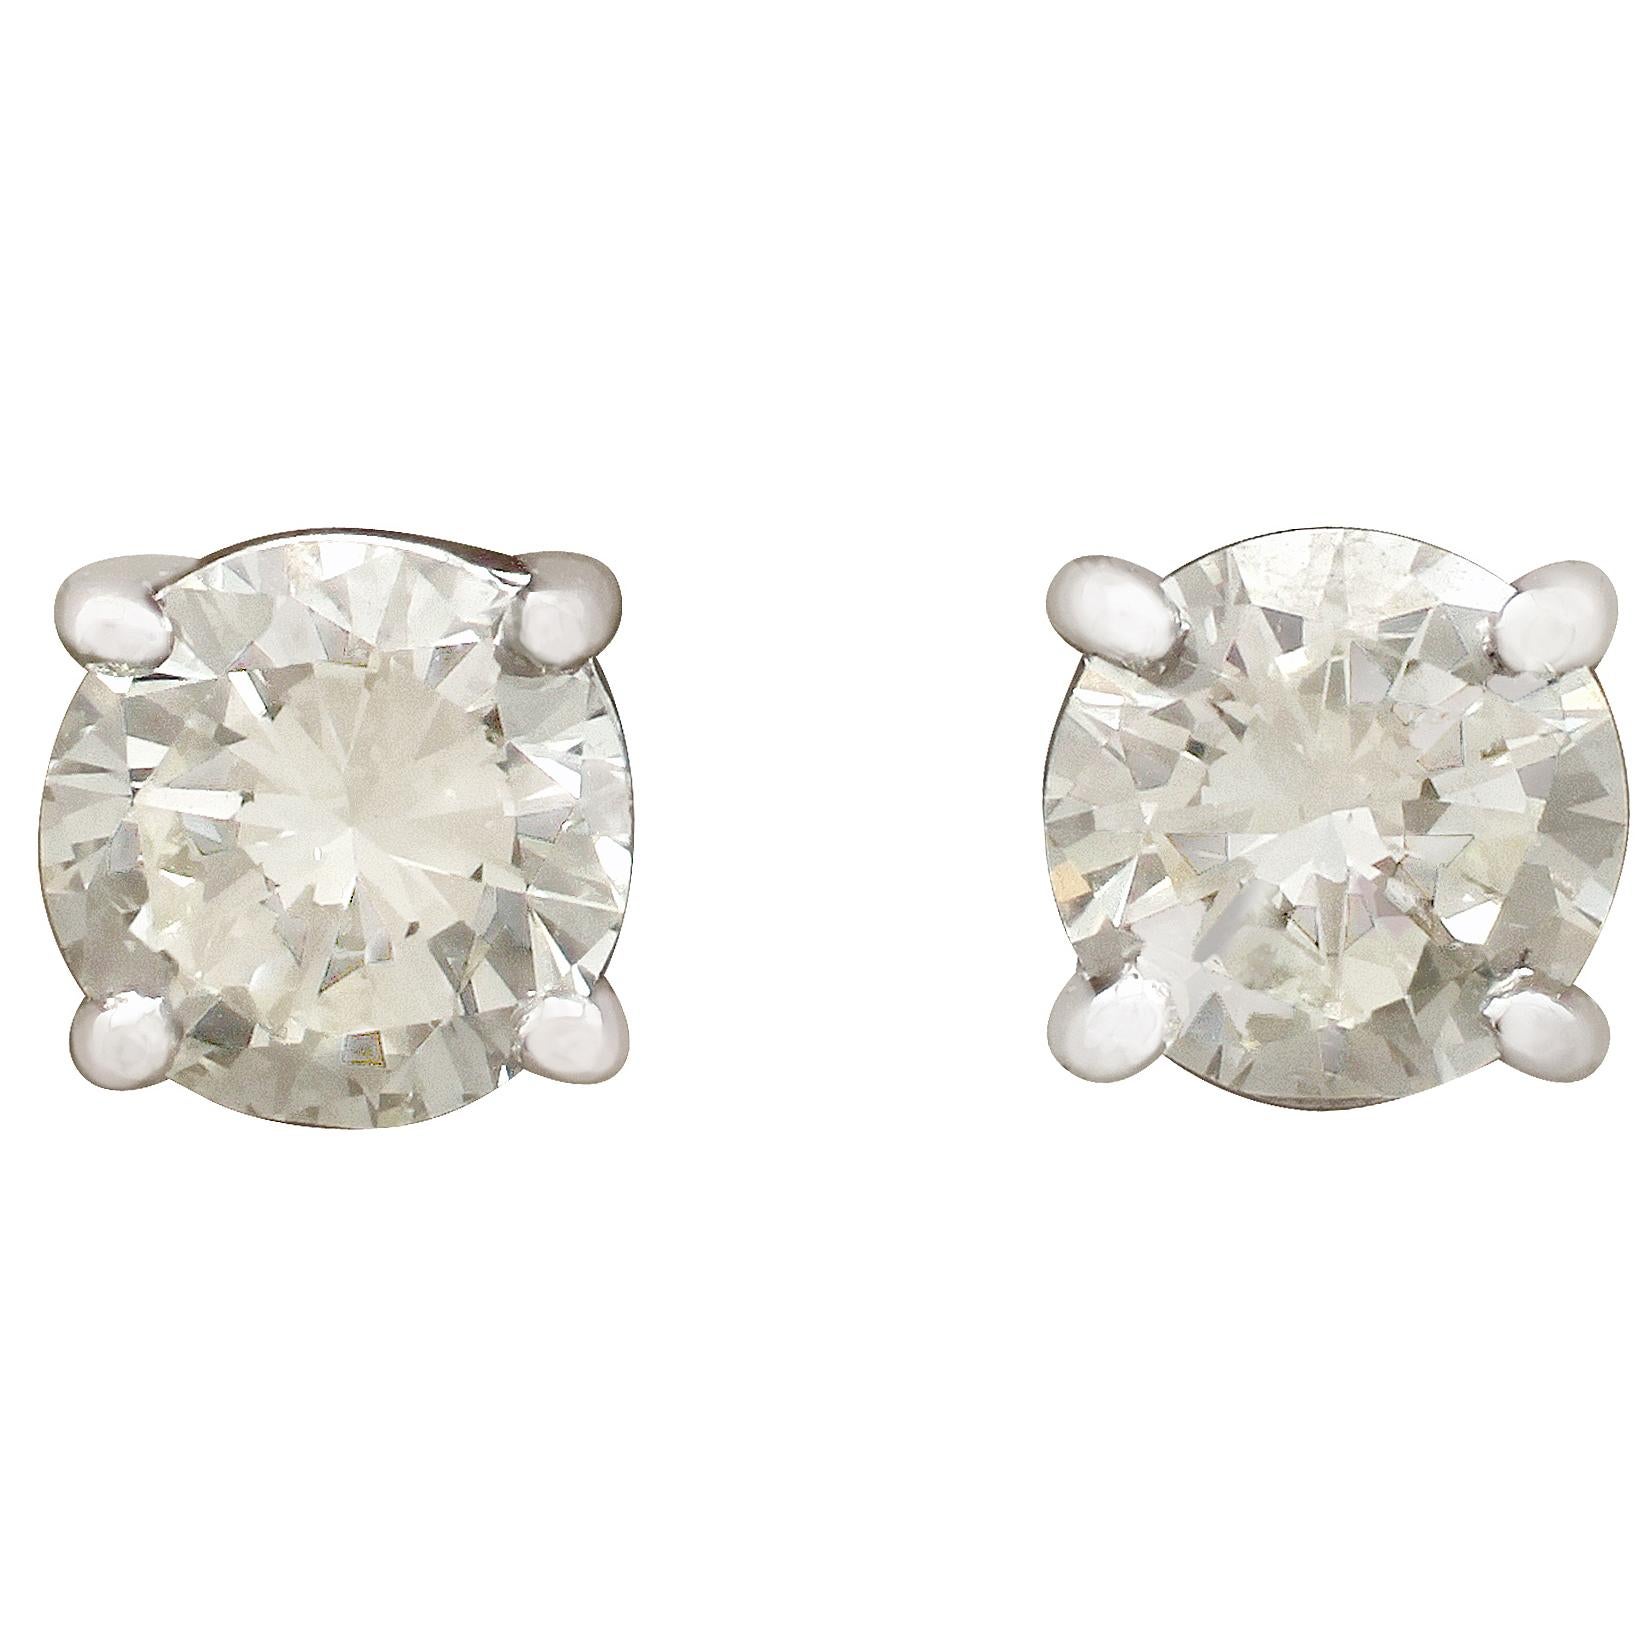 Contemporary 2000s 1.60 carat Diamond and White Gold Stud Earrings